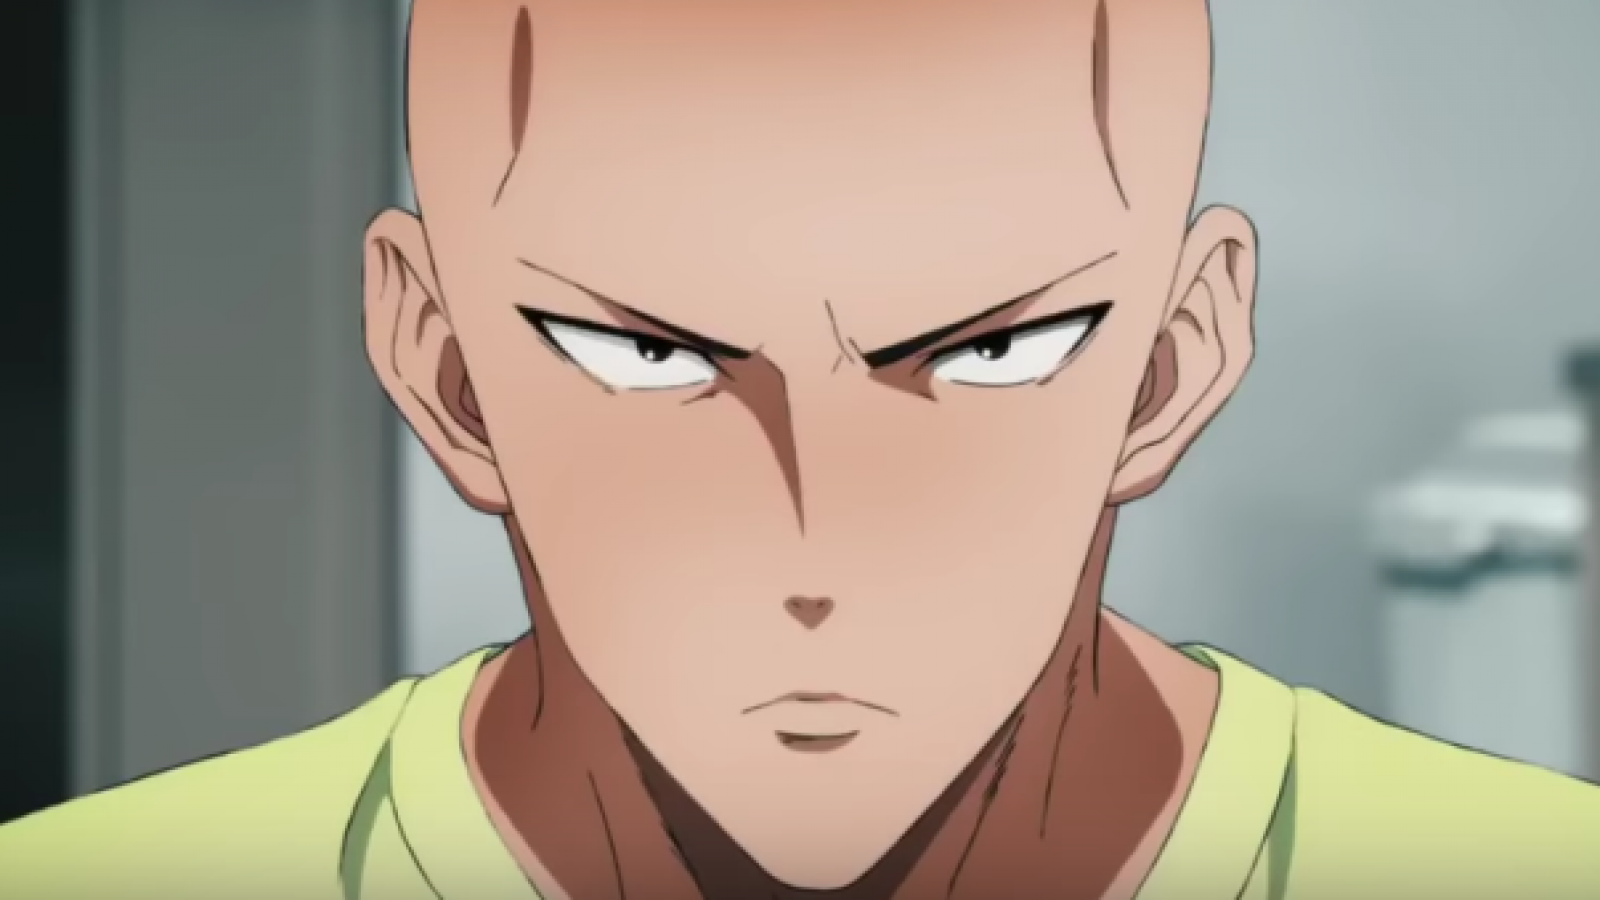 The Second Season Of The 'One-Punch Man' Anime Starts This April